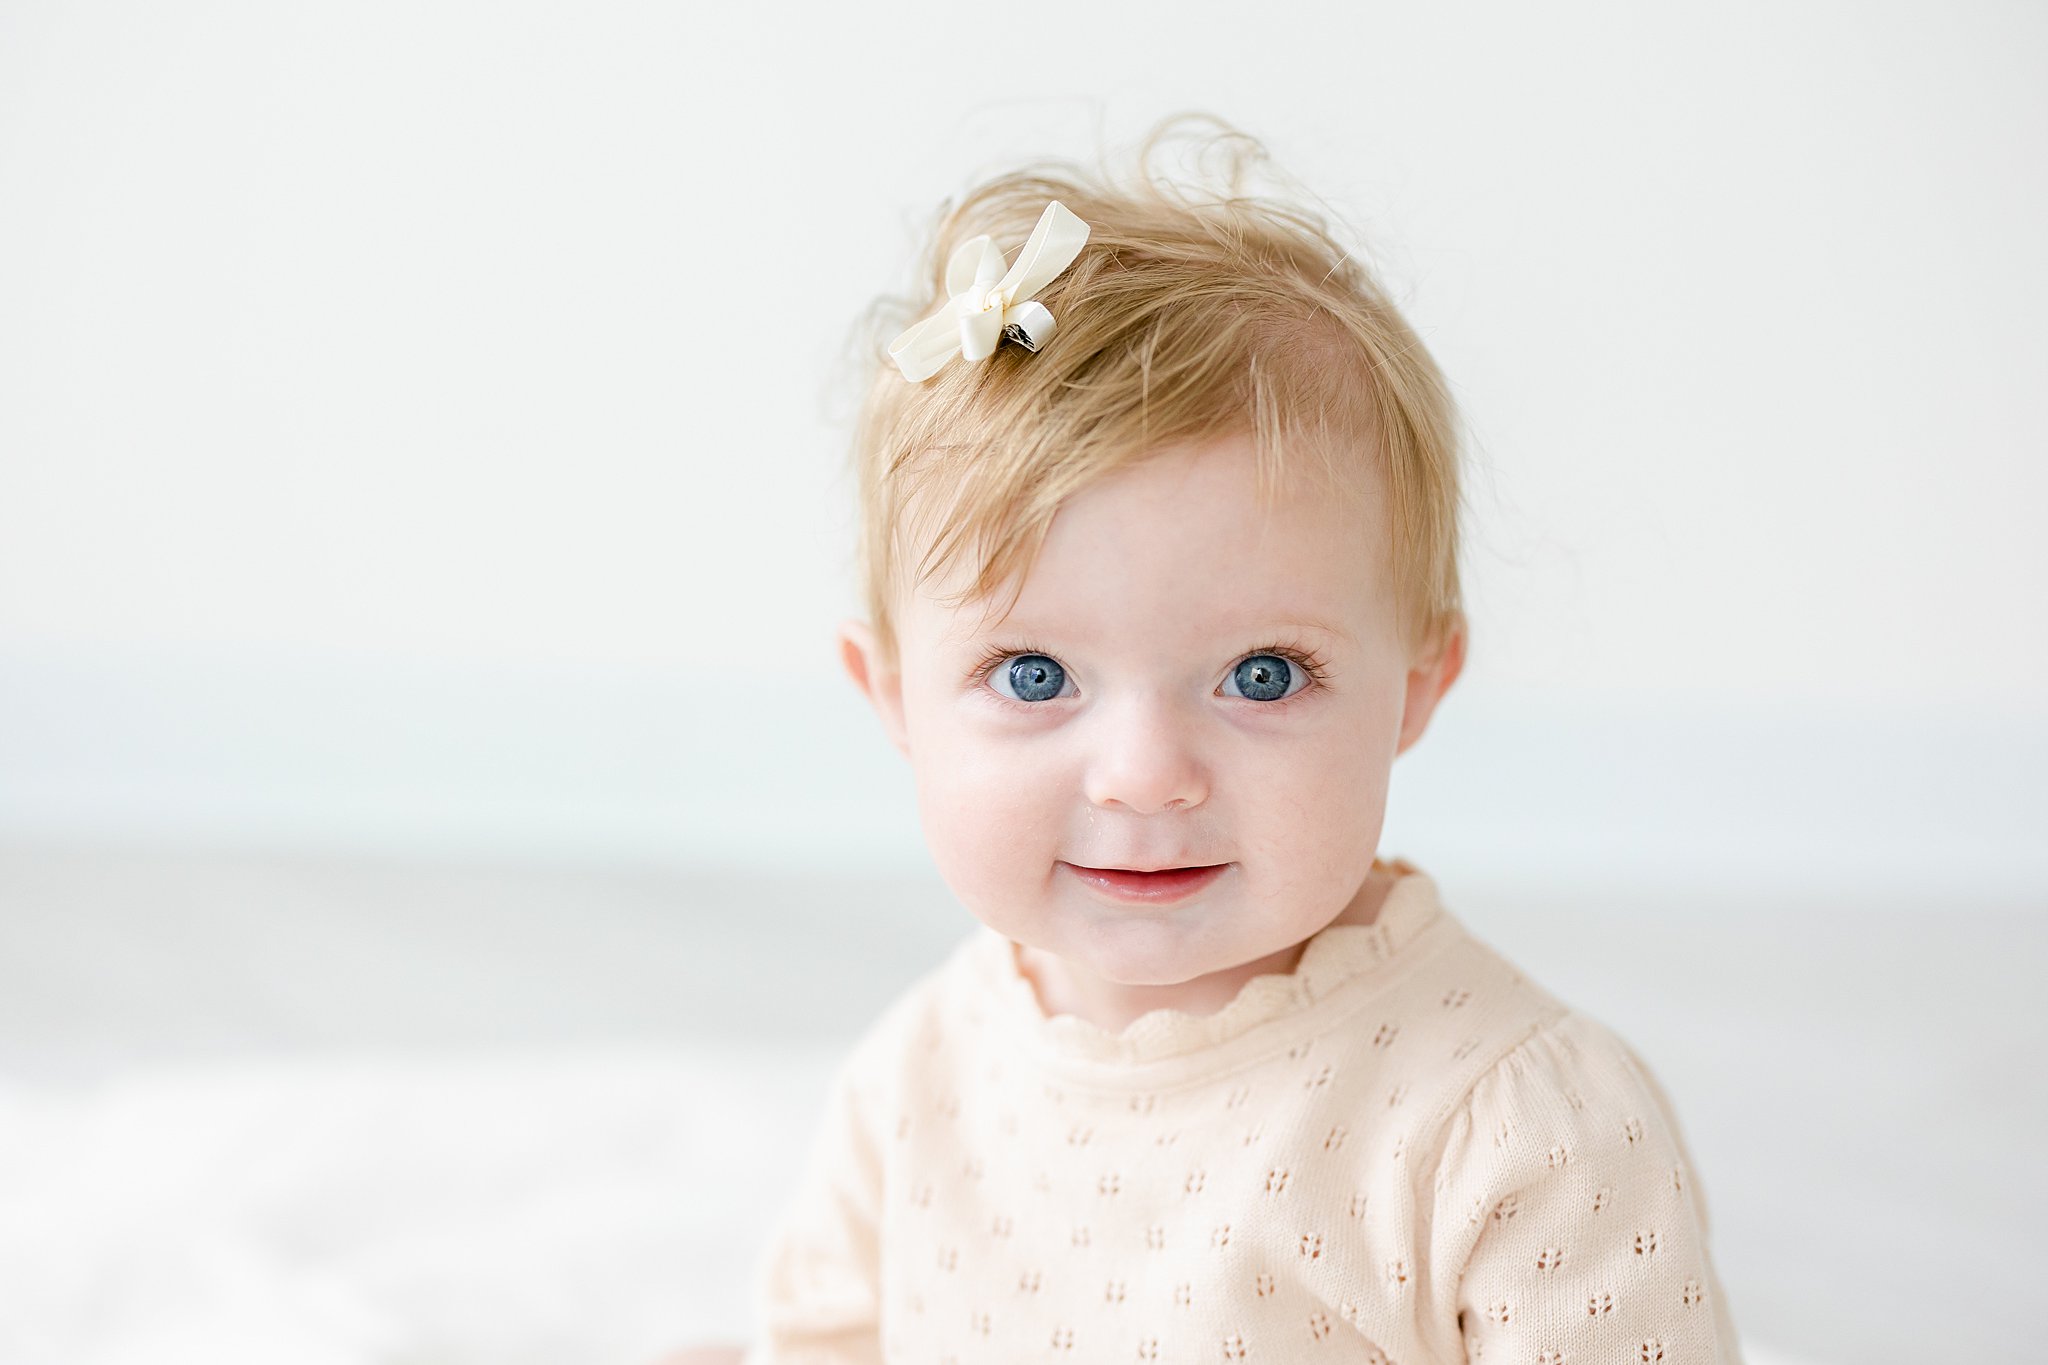 A toddler girl in a yellow onesie and hair bow sits in a studio smiling with big blue eyes